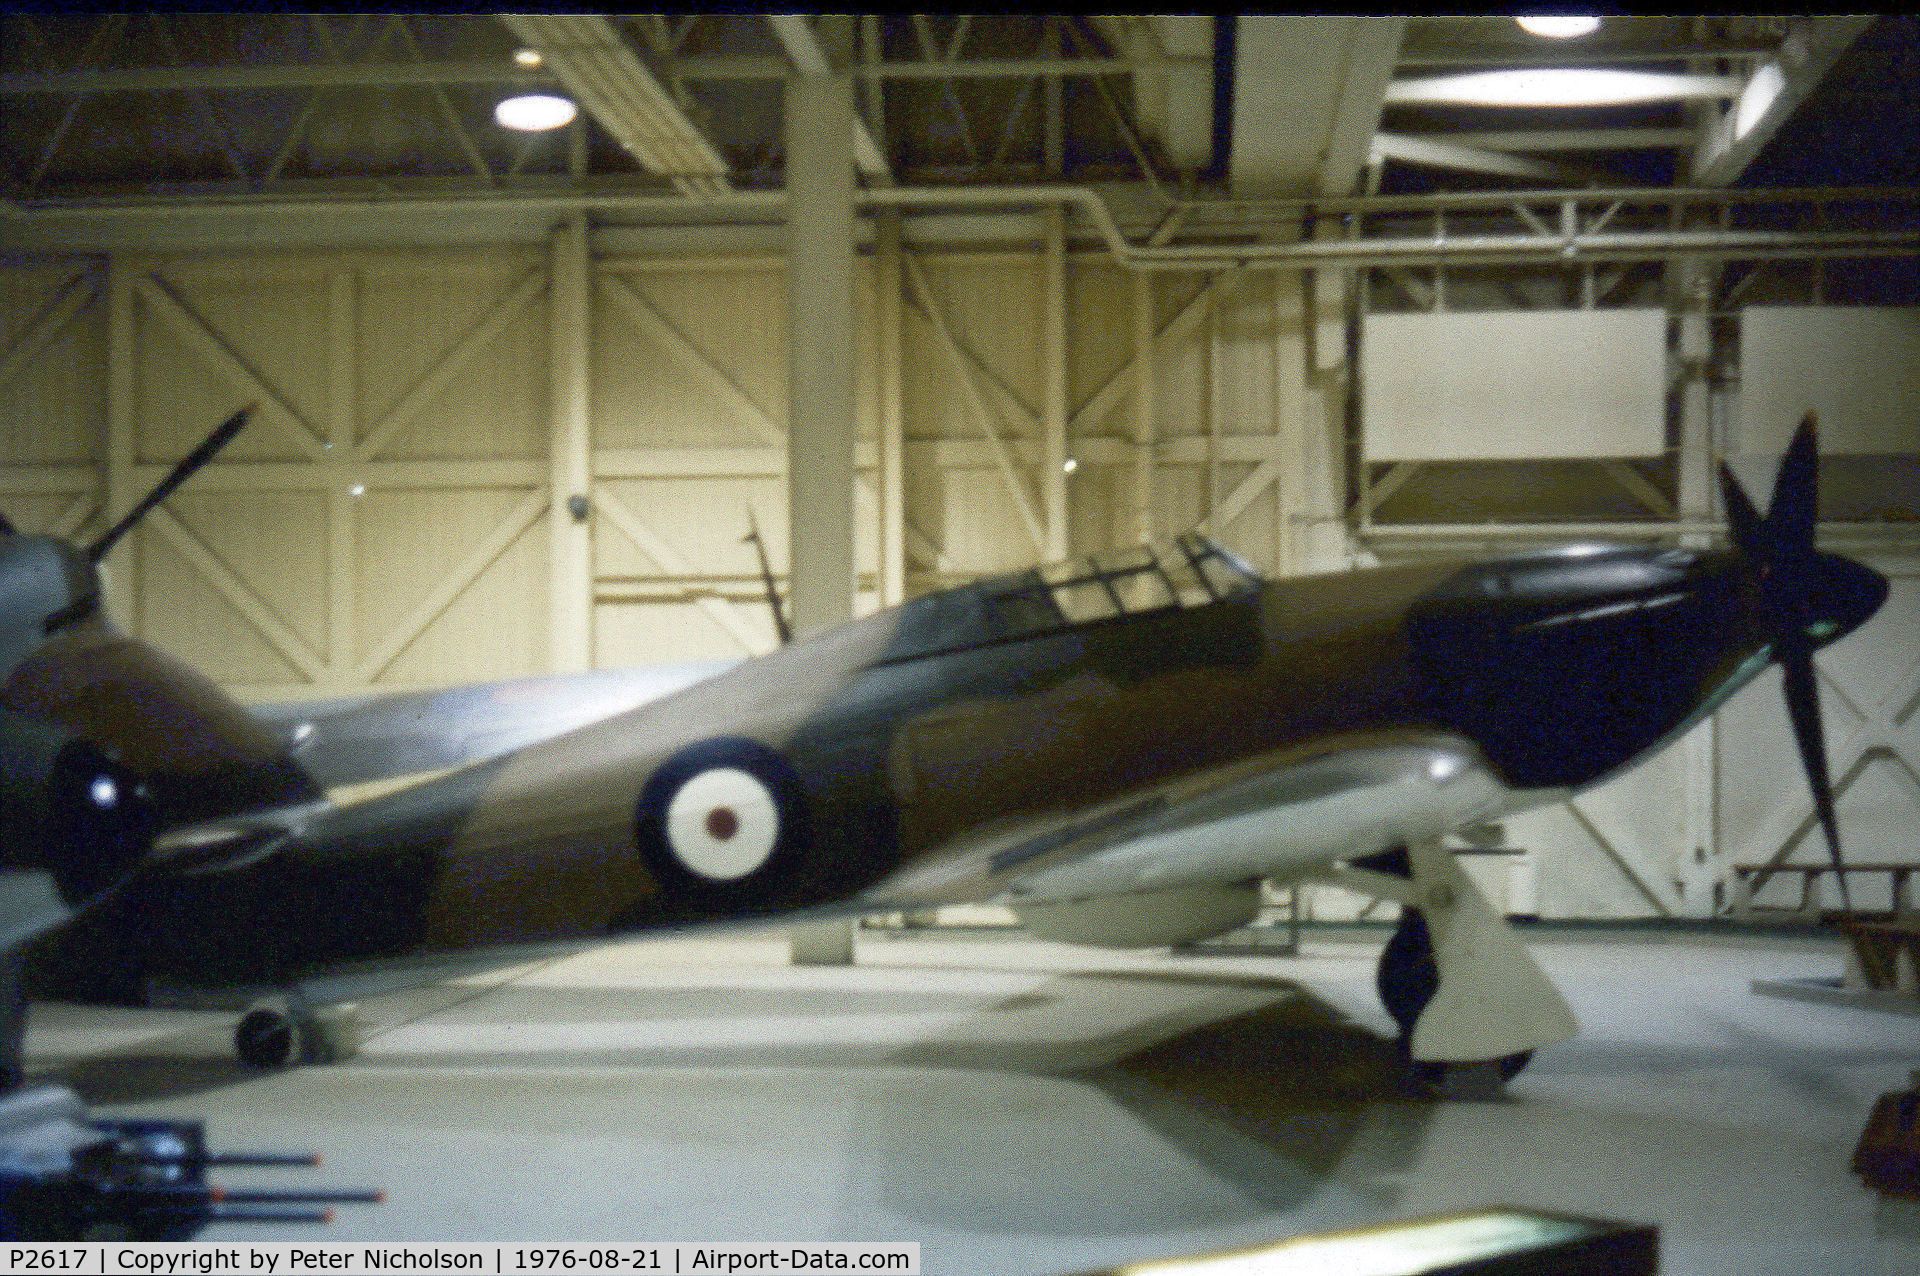 P2617, Hawker Hurricane I C/N Not found P2617, Hurricane I - RAF Maintenace serial 8373M - on display at the RAF Museum at Hendon as seen in August 1976.